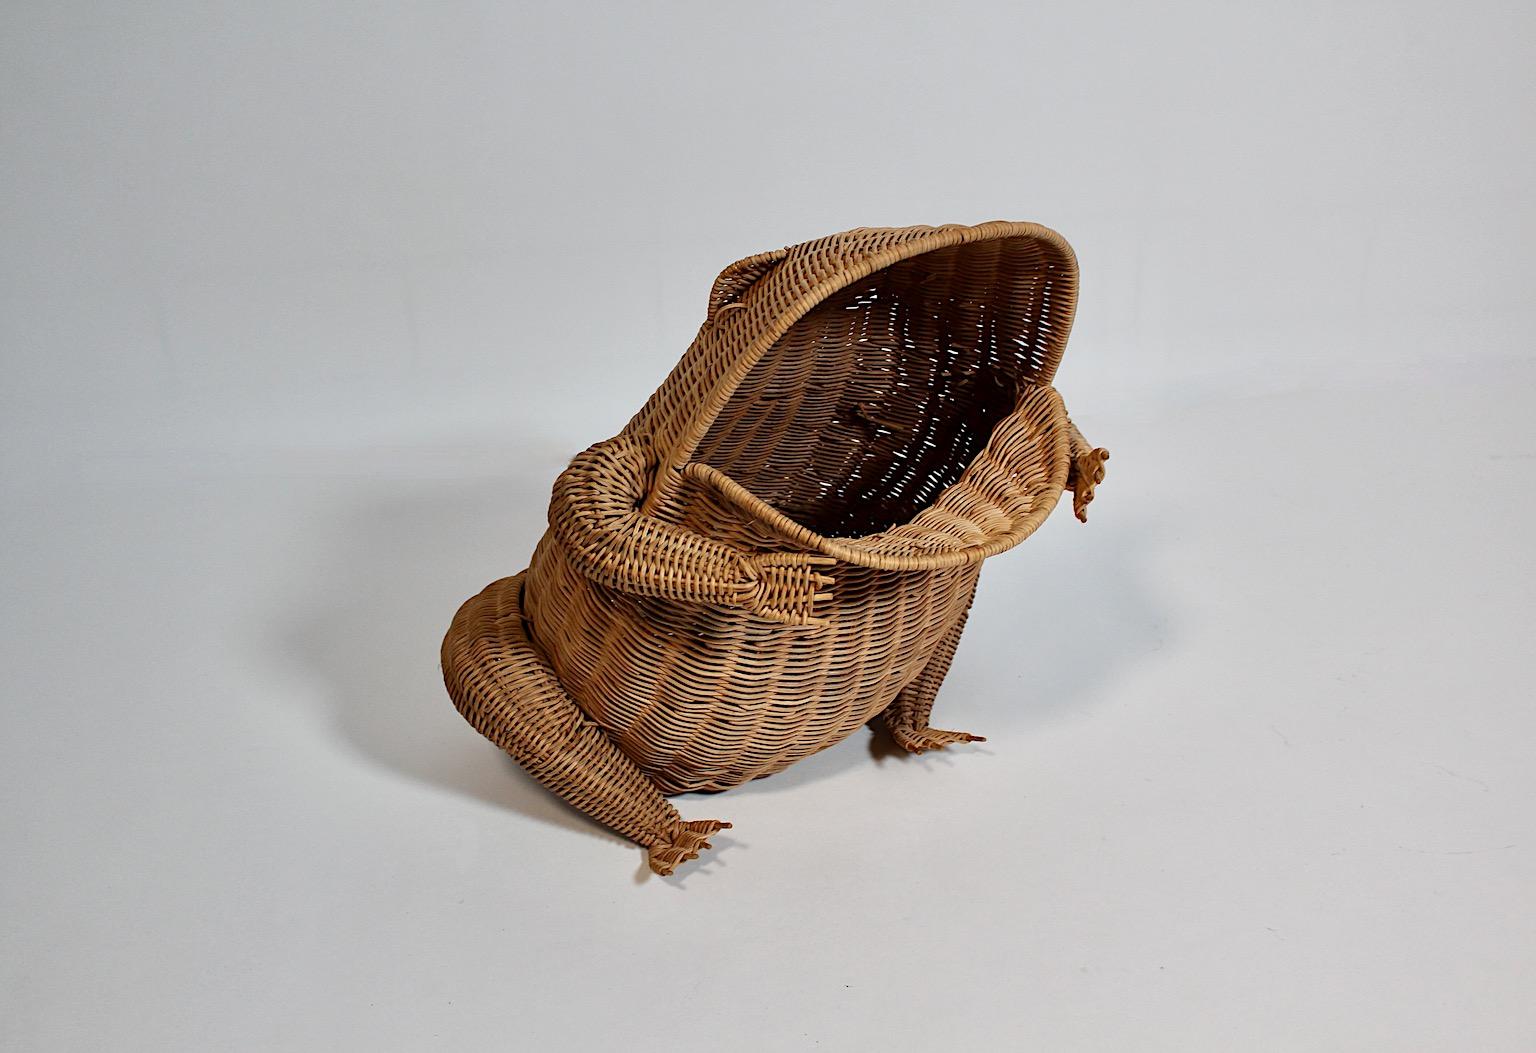 Modern vintage organic newspaper rack or magazine rack frog like design 1970s France.
A stunning organic animal newspaper rack or magazine rack from rattan frog like 1970s France.
This frog is in very good condition with minor signs of age and